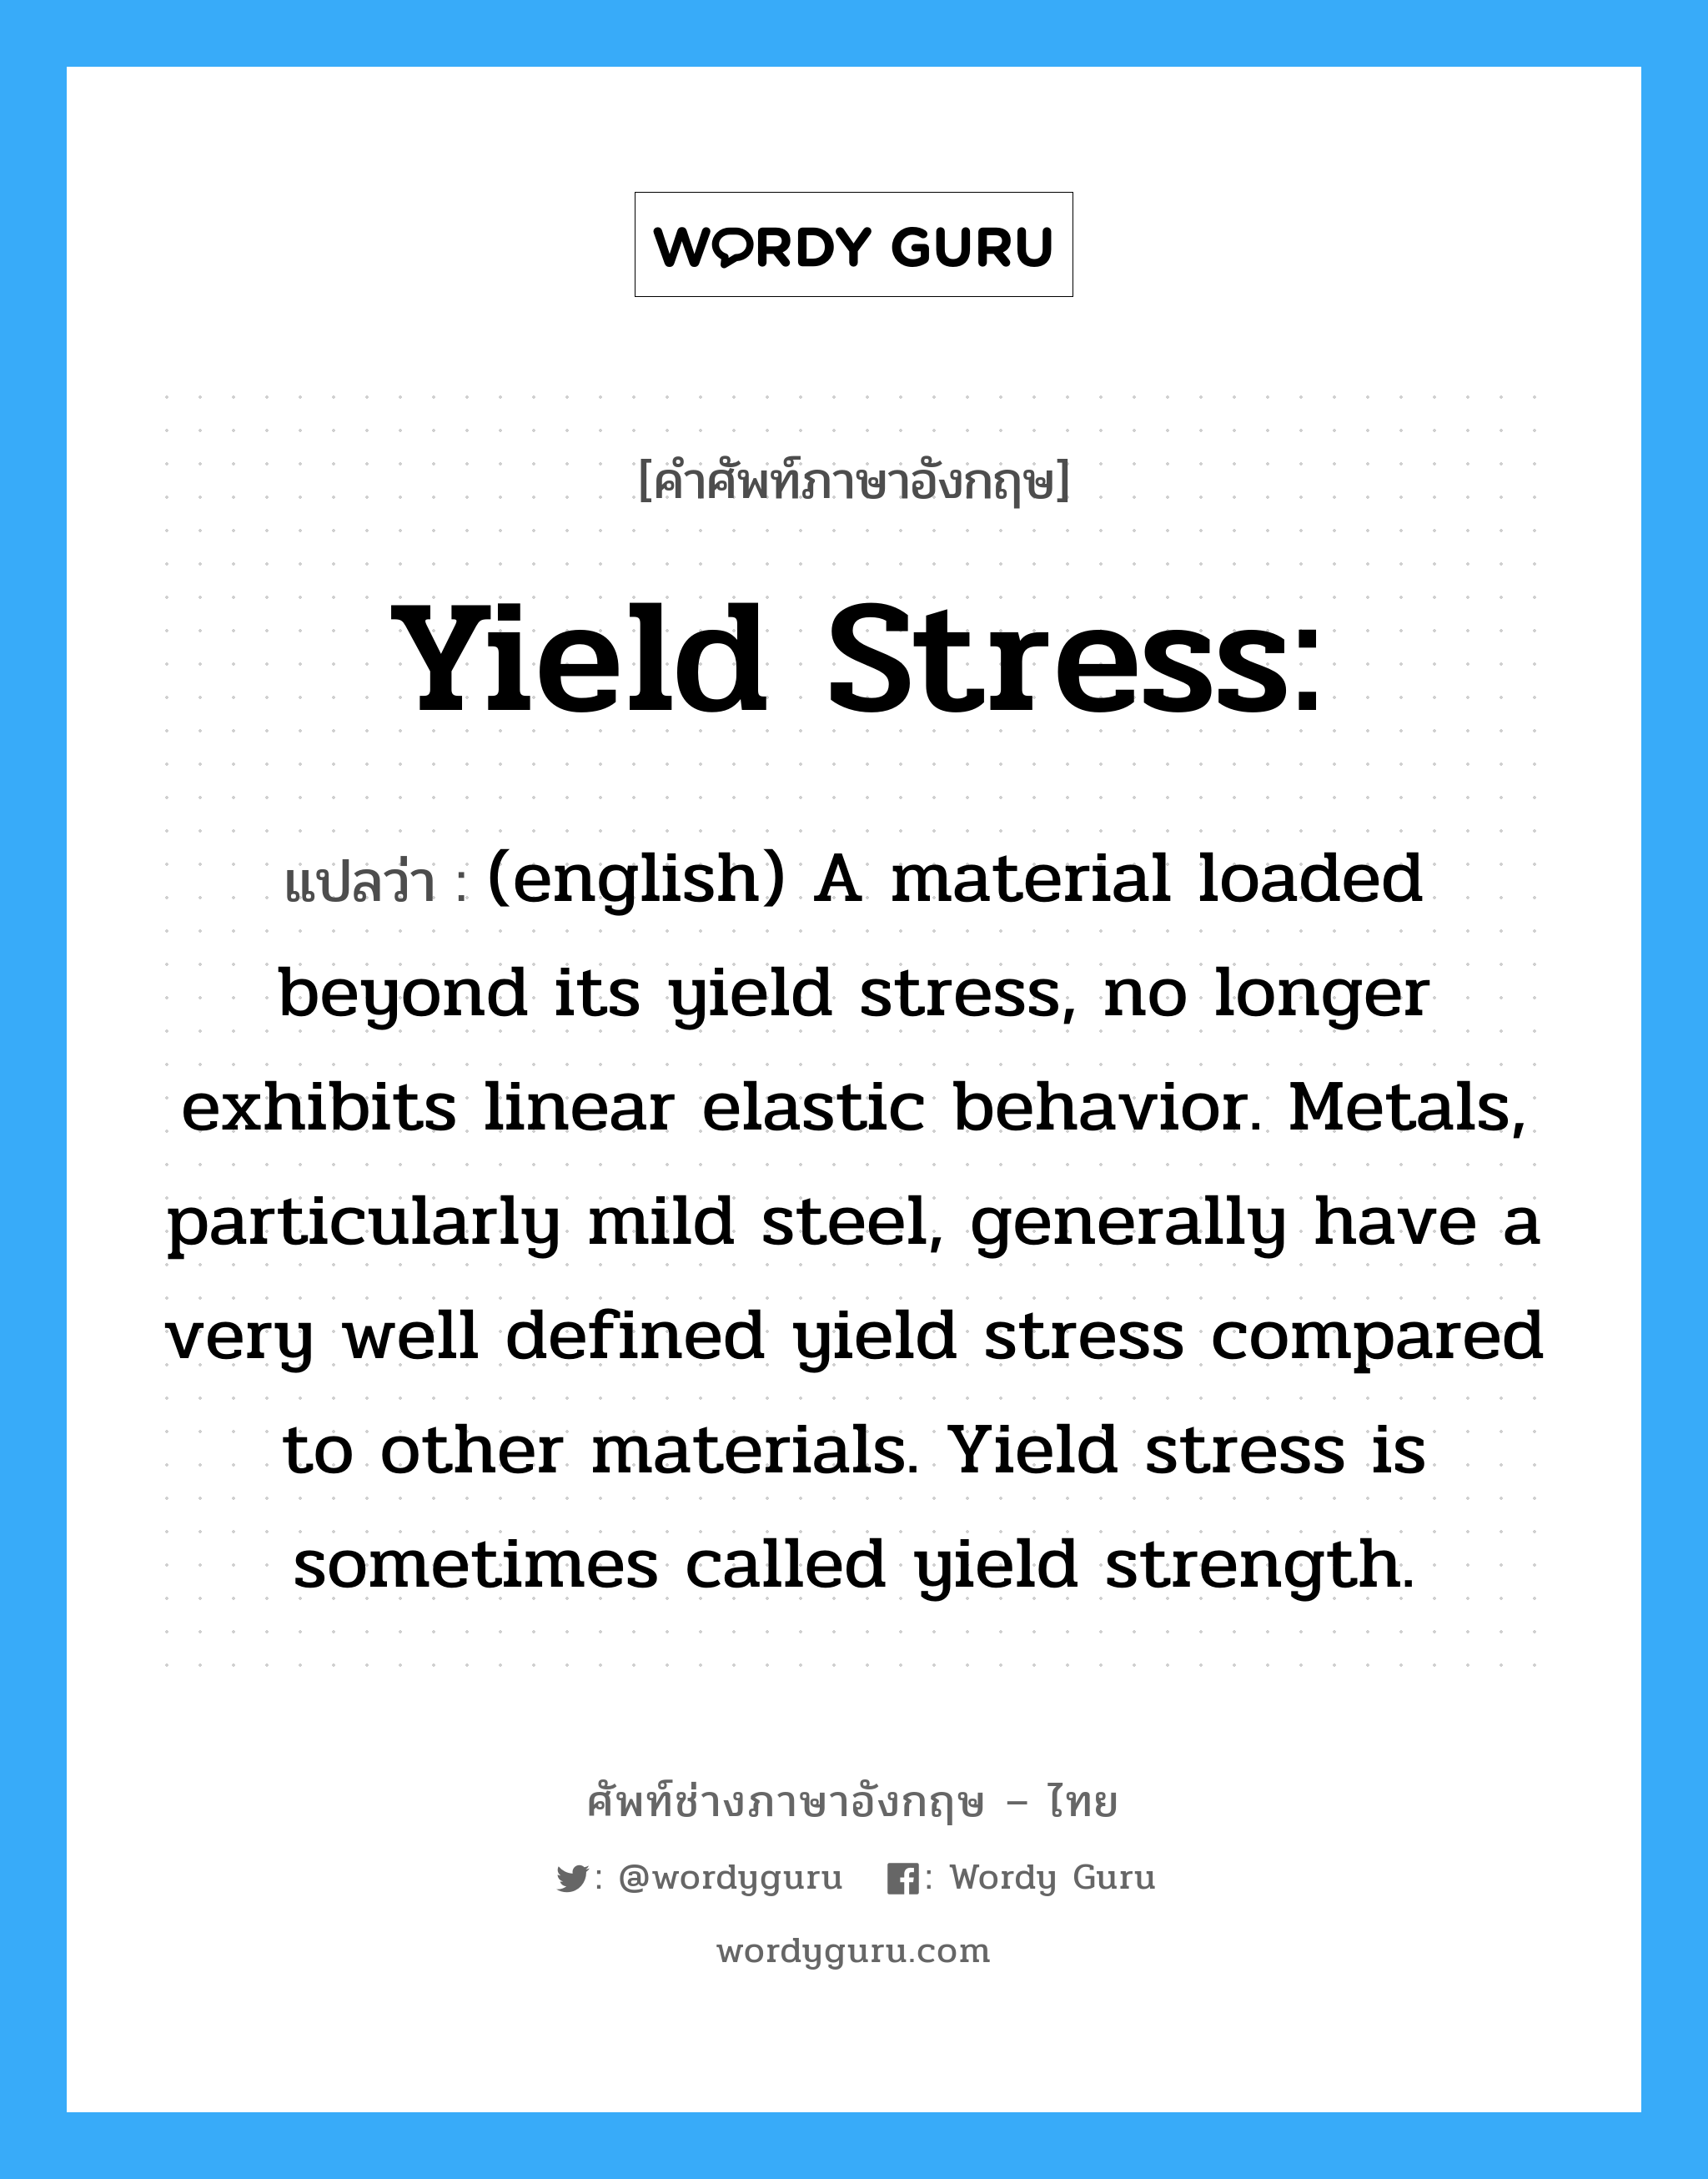 Yield stress: แปลว่า?, คำศัพท์ช่างภาษาอังกฤษ - ไทย Yield stress: คำศัพท์ภาษาอังกฤษ Yield stress: แปลว่า (english) A material loaded beyond its yield stress, no longer exhibits linear elastic behavior. Metals, particularly mild steel, generally have a very well defined yield stress compared to other materials. Yield stress is sometimes called yield strength.